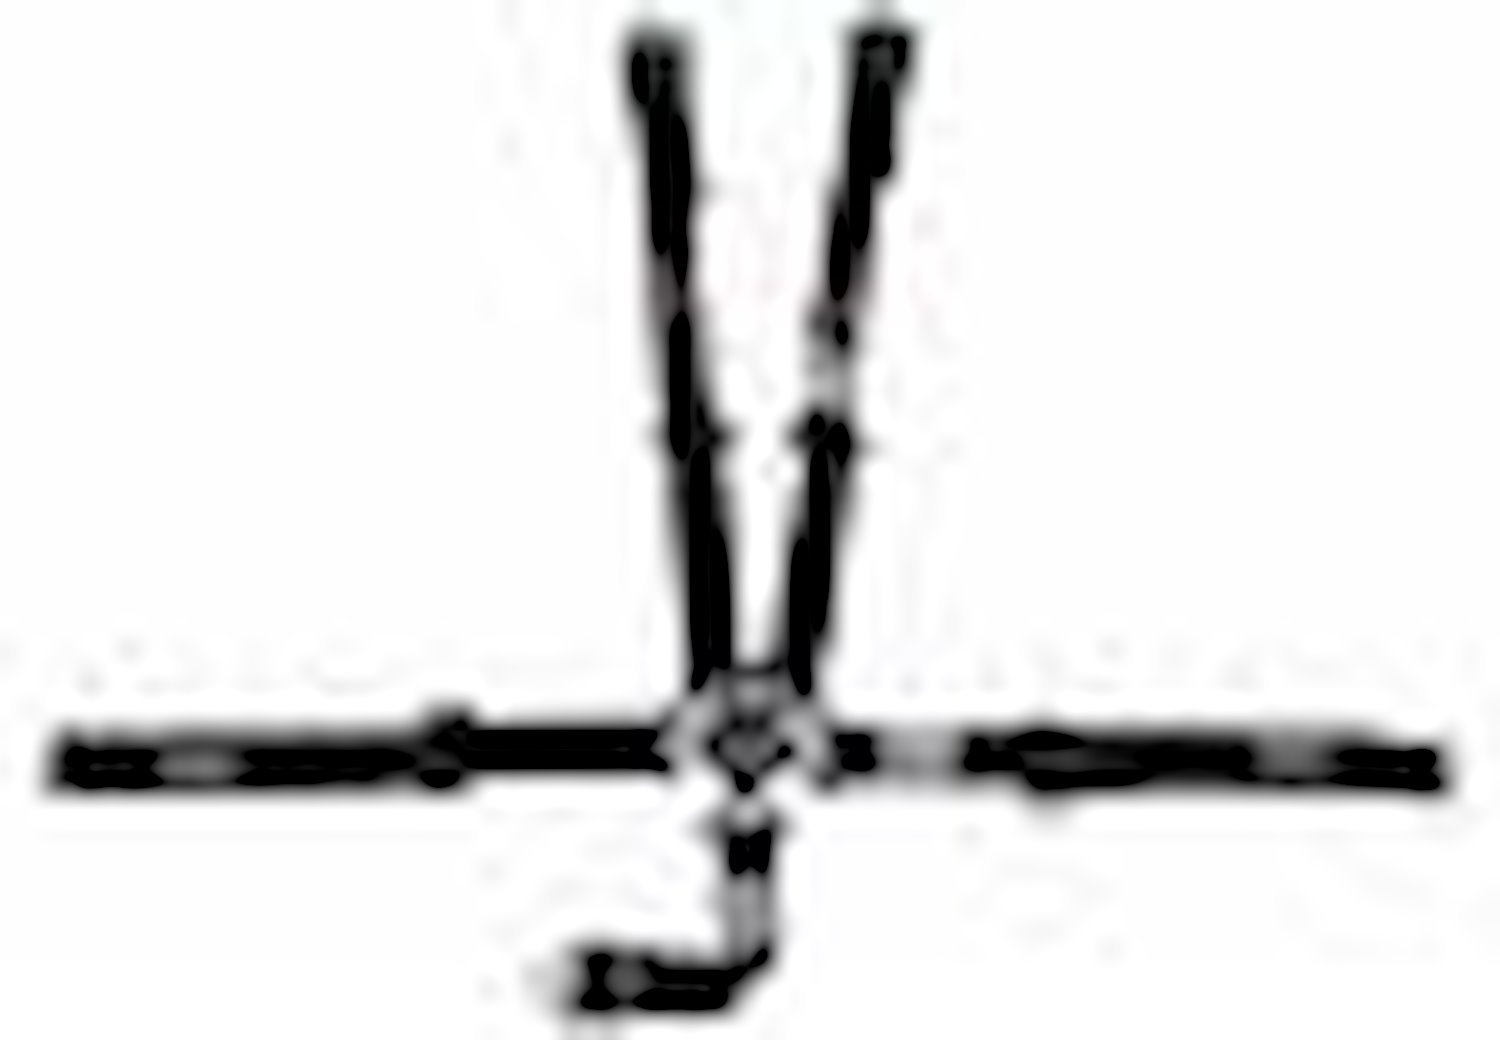 SFI 16.1 CAM-LOCK HARNESS 2 PULL DOWN Lap Belt 2 Shoulder Harness Individual ROLL BAR Mount 2 DOUBLE Sub ALL WRAP/BOLT ENDS GRAY